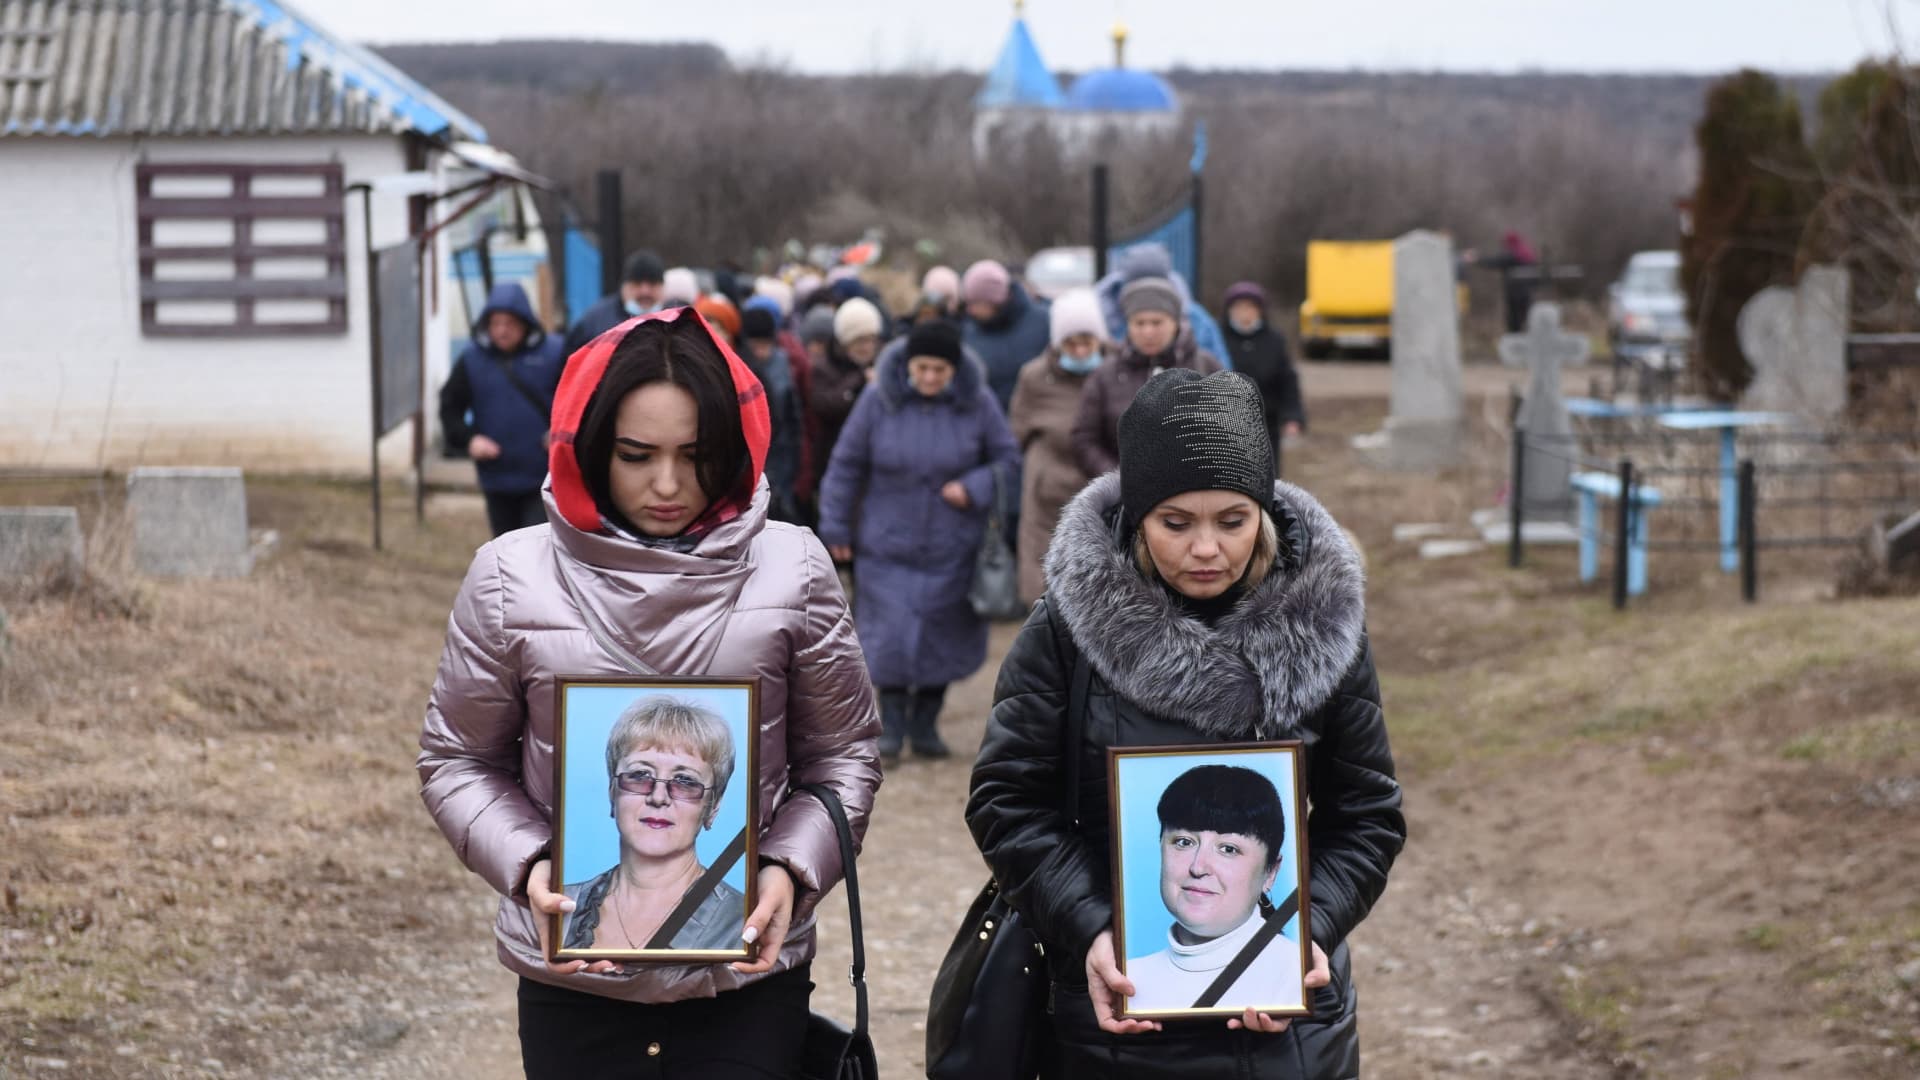 Women carry portraits of school teachers Yelena Ivanova and Yelena Kudrik, who were killed by shelling, during a funeral at a cemetery in the separatist-controlled town of Horlivka (Gorlovka) in the Donetsk region, Ukraine, February 28, 2022.